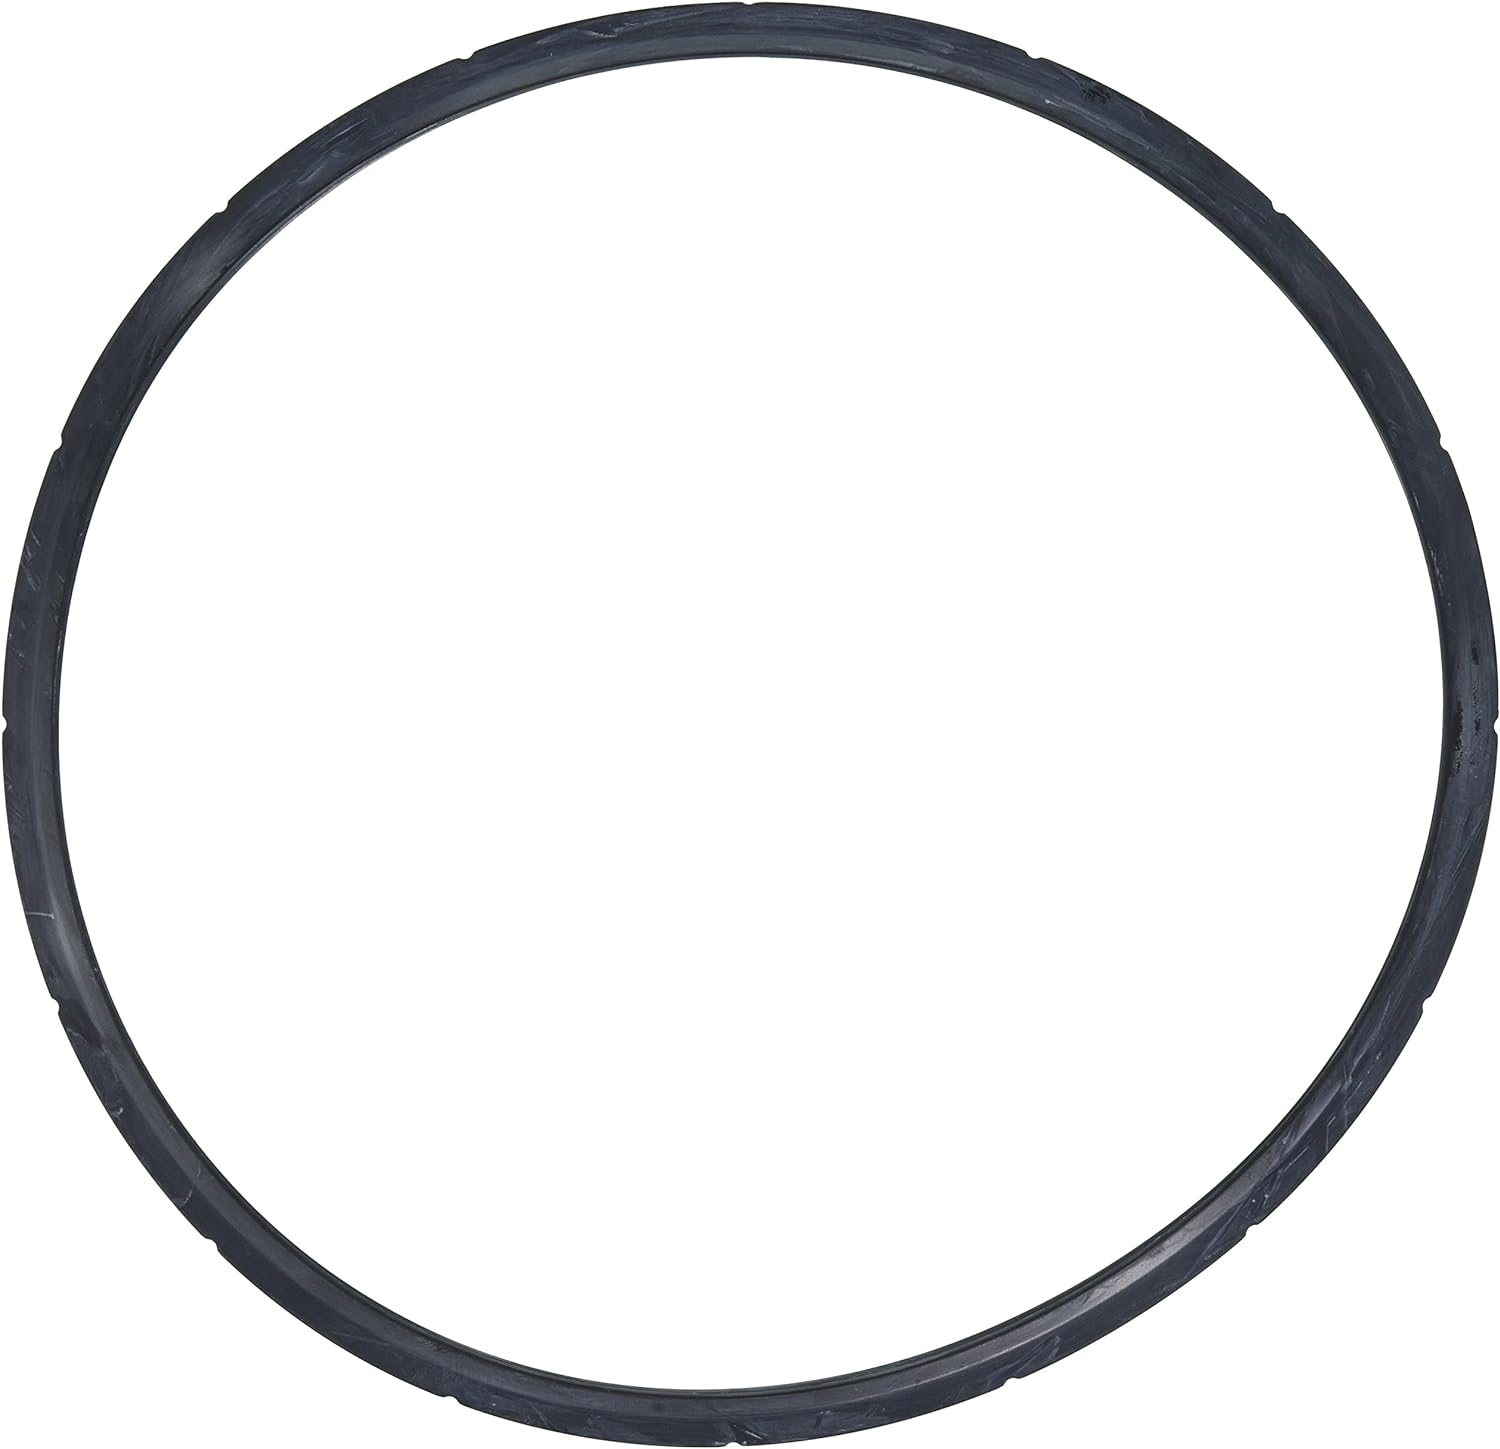 Presto 09902 Pressure Cooker Sealing Ring with Air Vent and Safety Plug